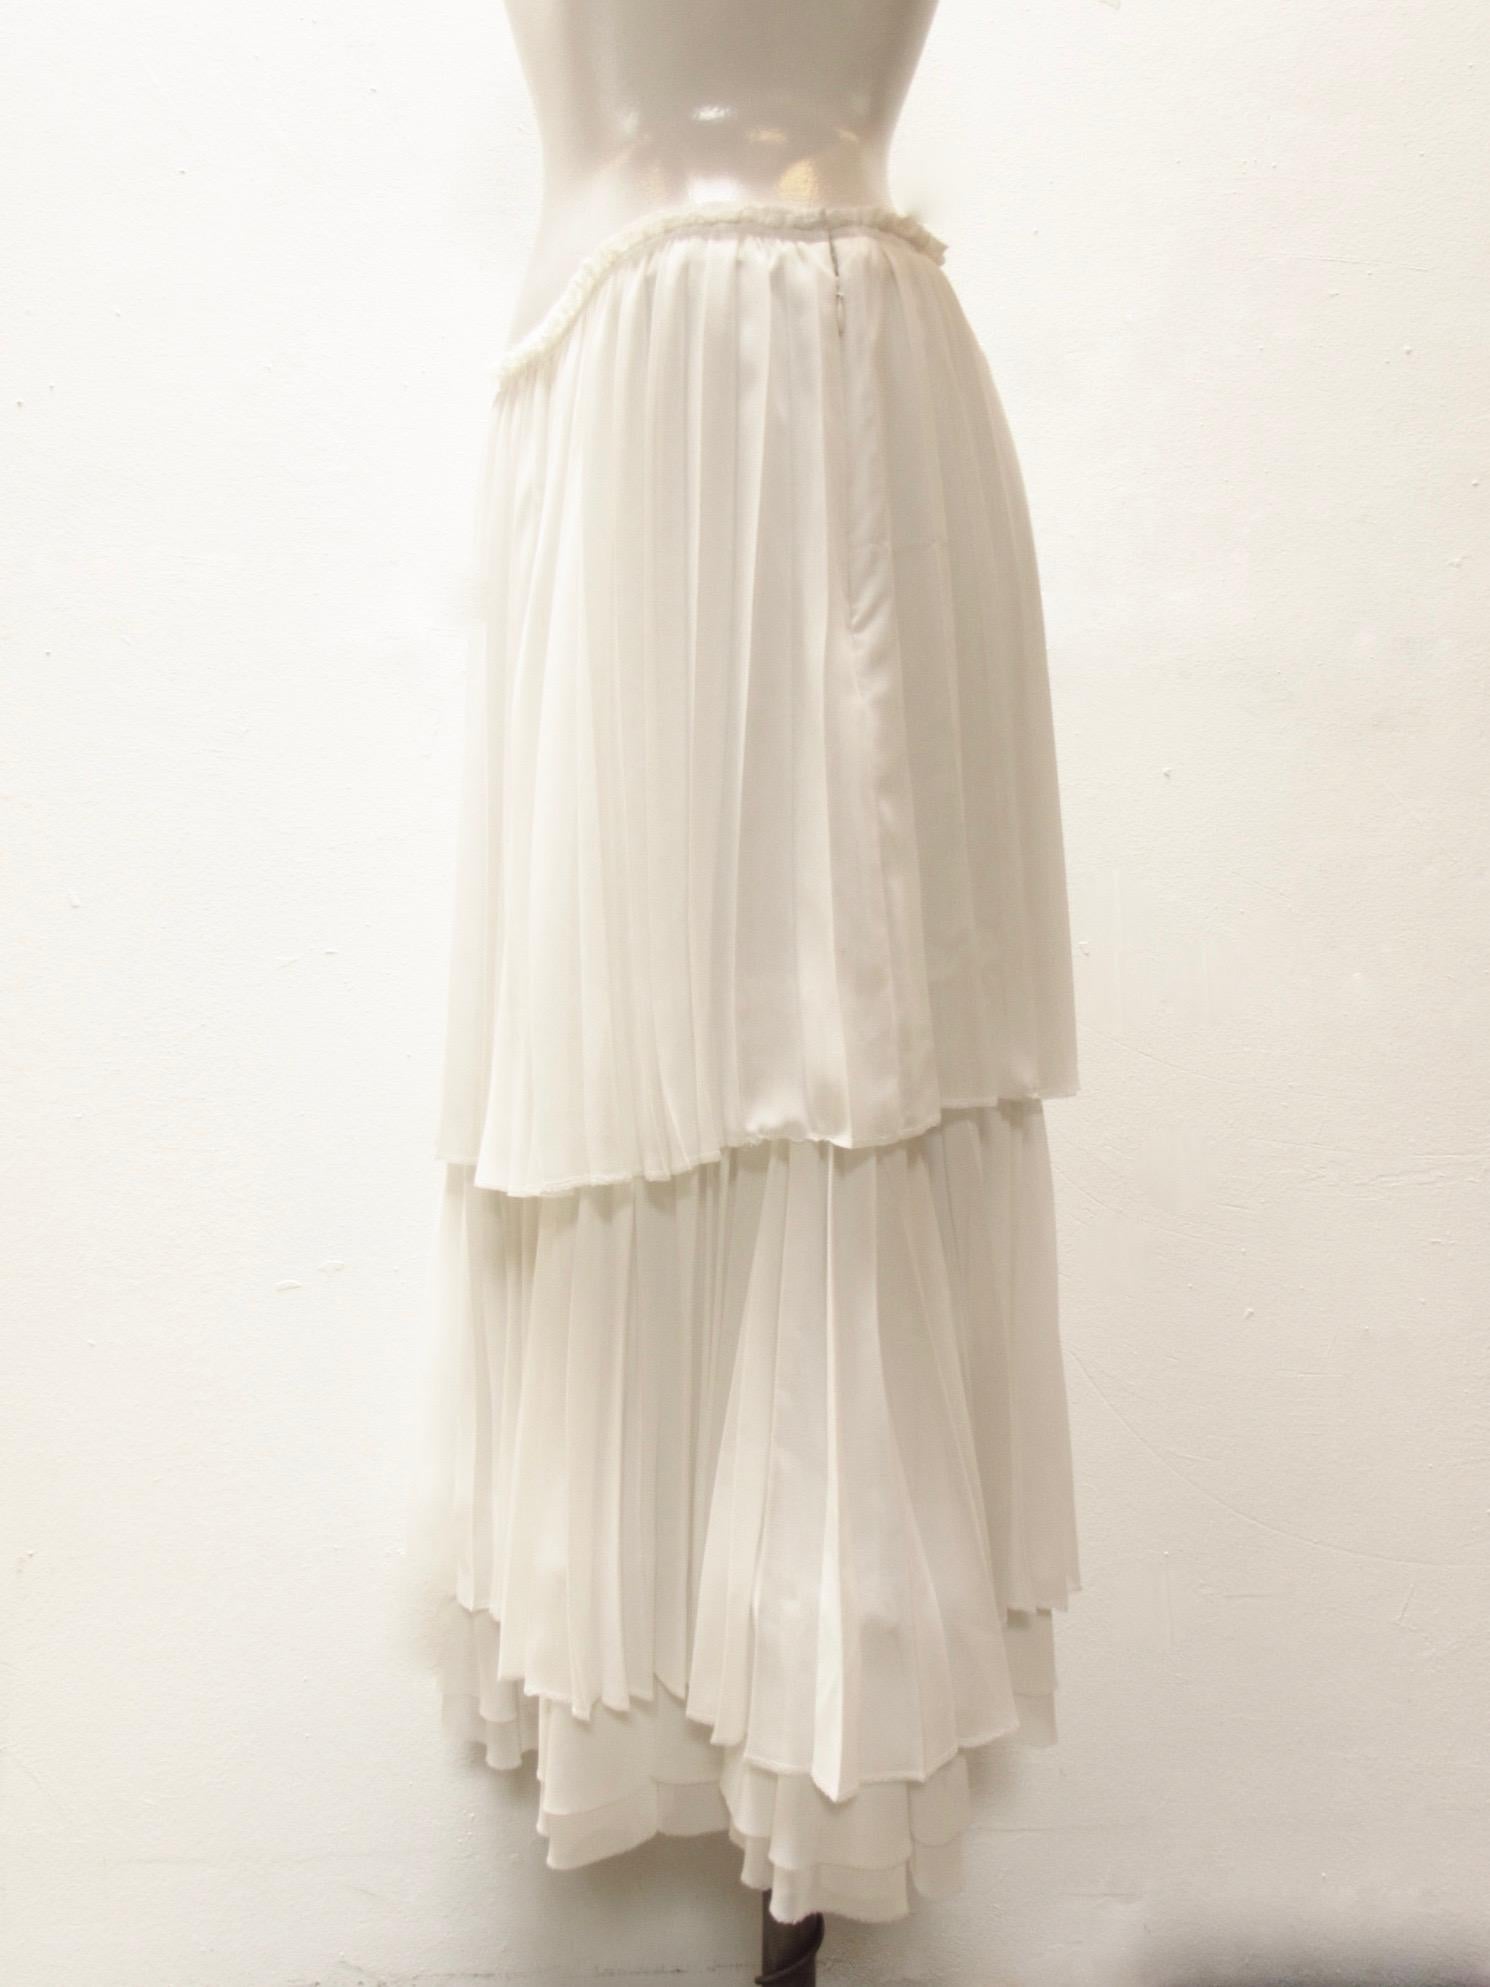 Comme des Garçons Pleated Silk Skirt In New Condition For Sale In Laguna Beach, CA